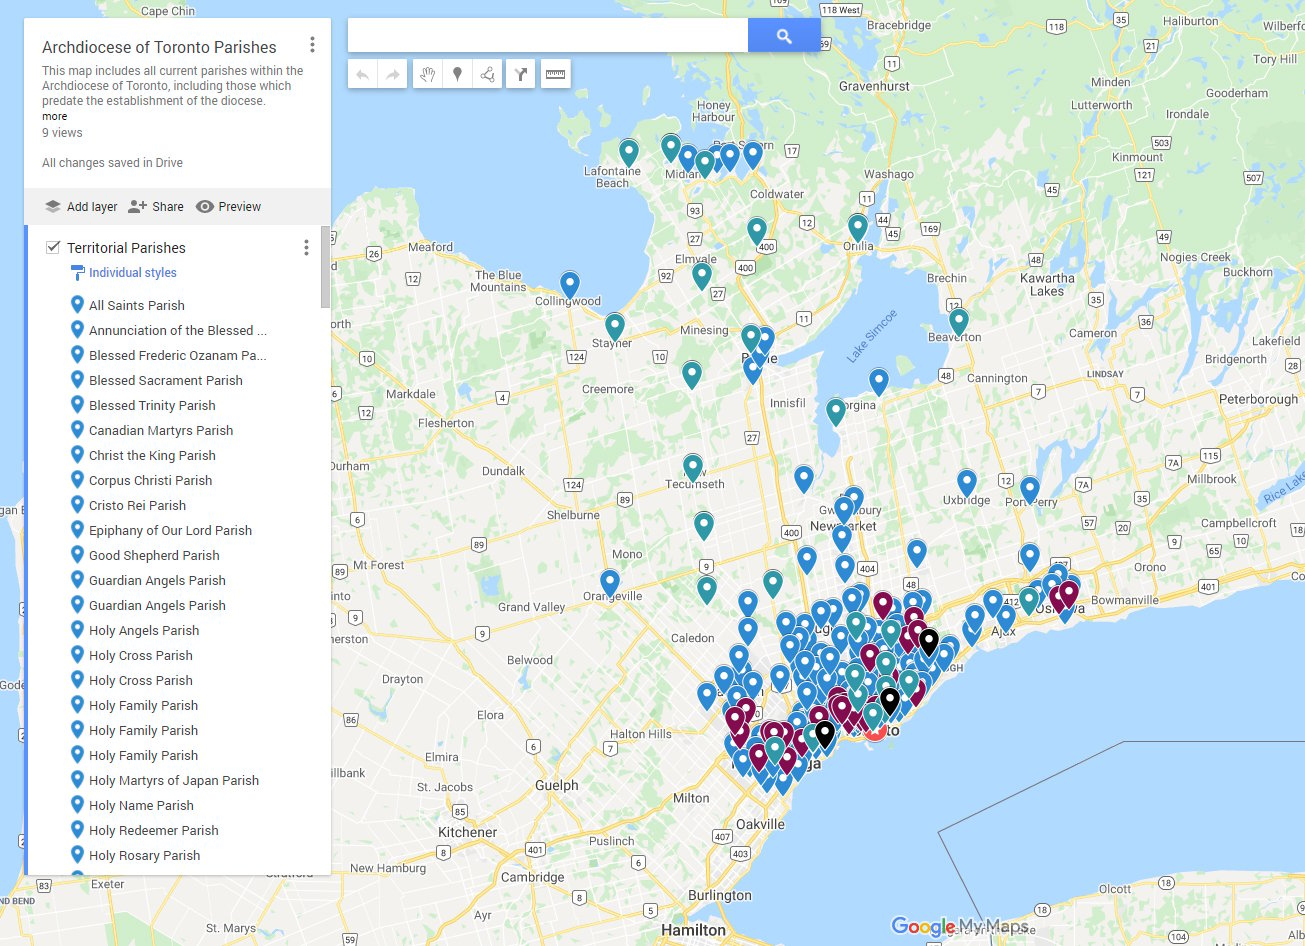 Archdiocese of Toronto - Map of Parishes in the Archdiocese of Toronto